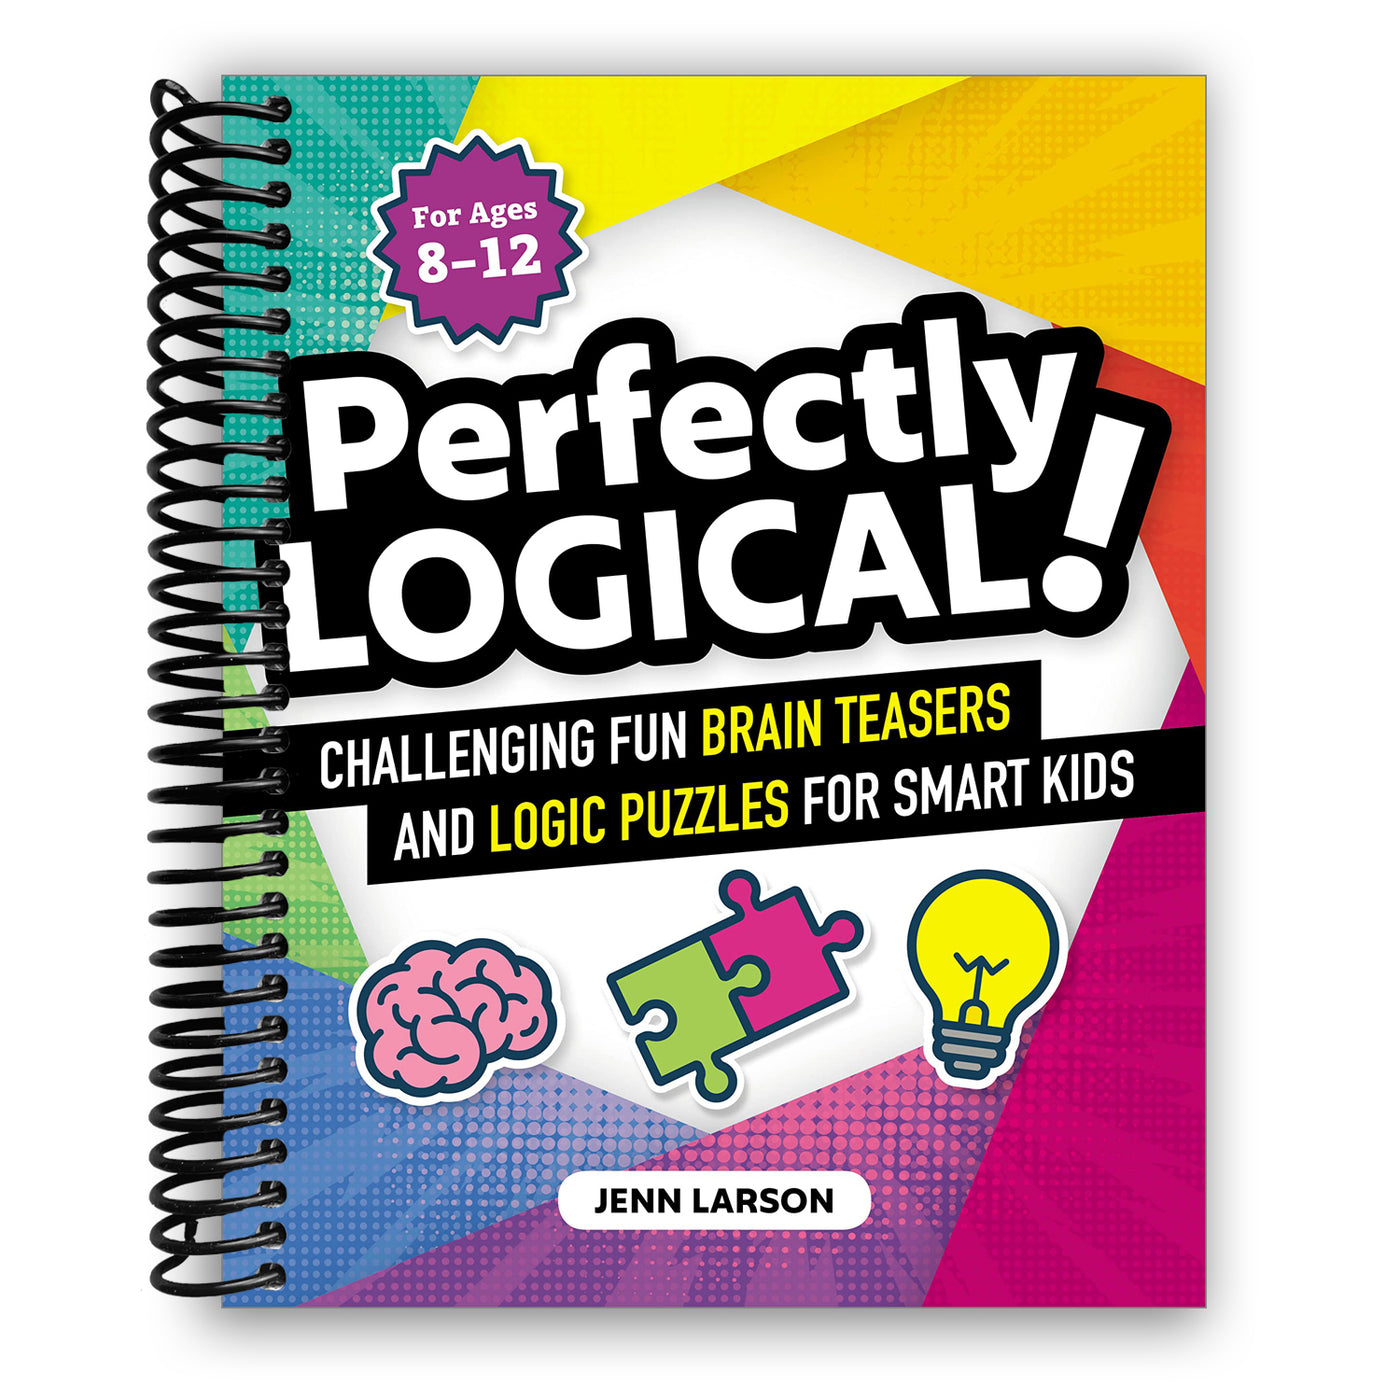 Perfectly Logical!: Challenging Fun Brain Teasers and Logic Puzzles for Smart Kids (Spiral Bound)